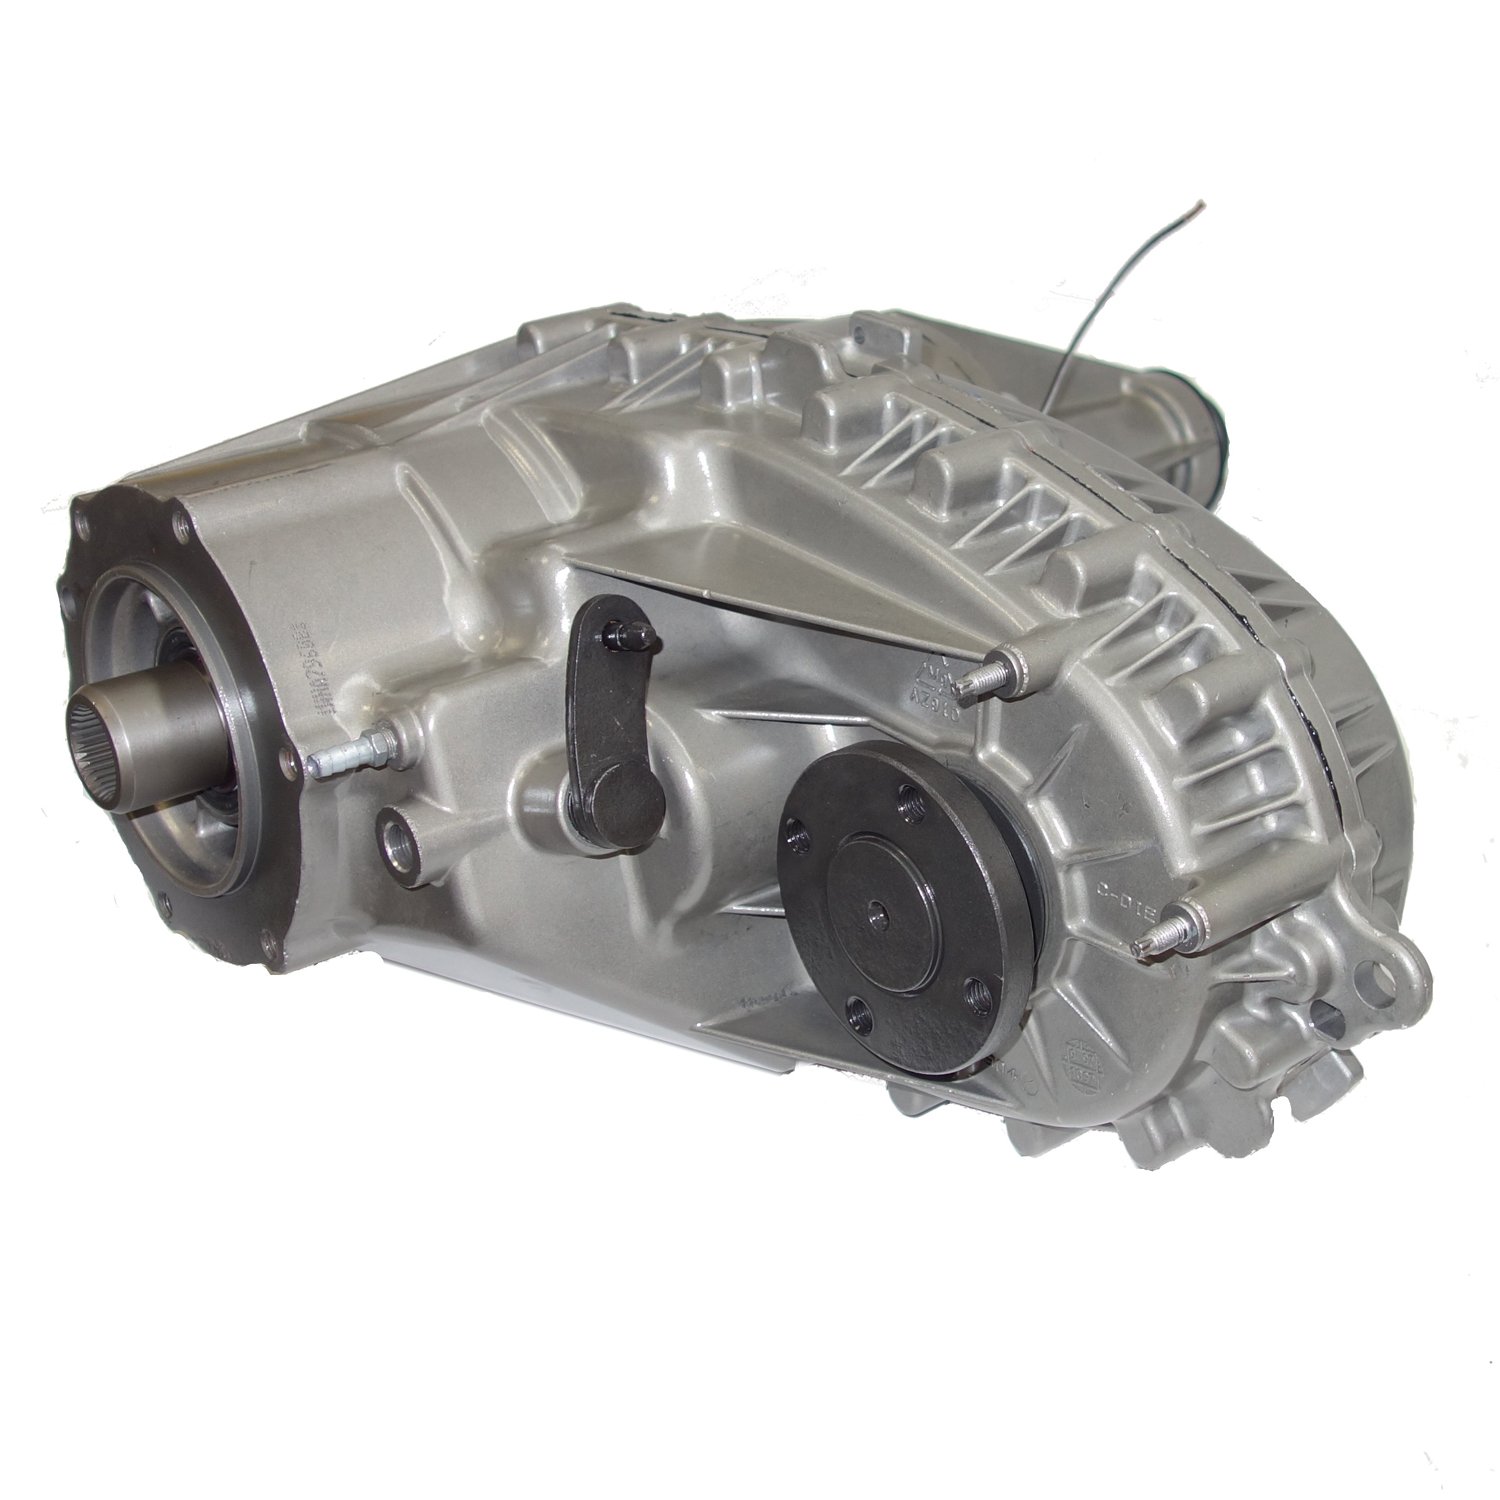 Remanufactured BW4406 Transfer Case for Ford 06-08 F-series